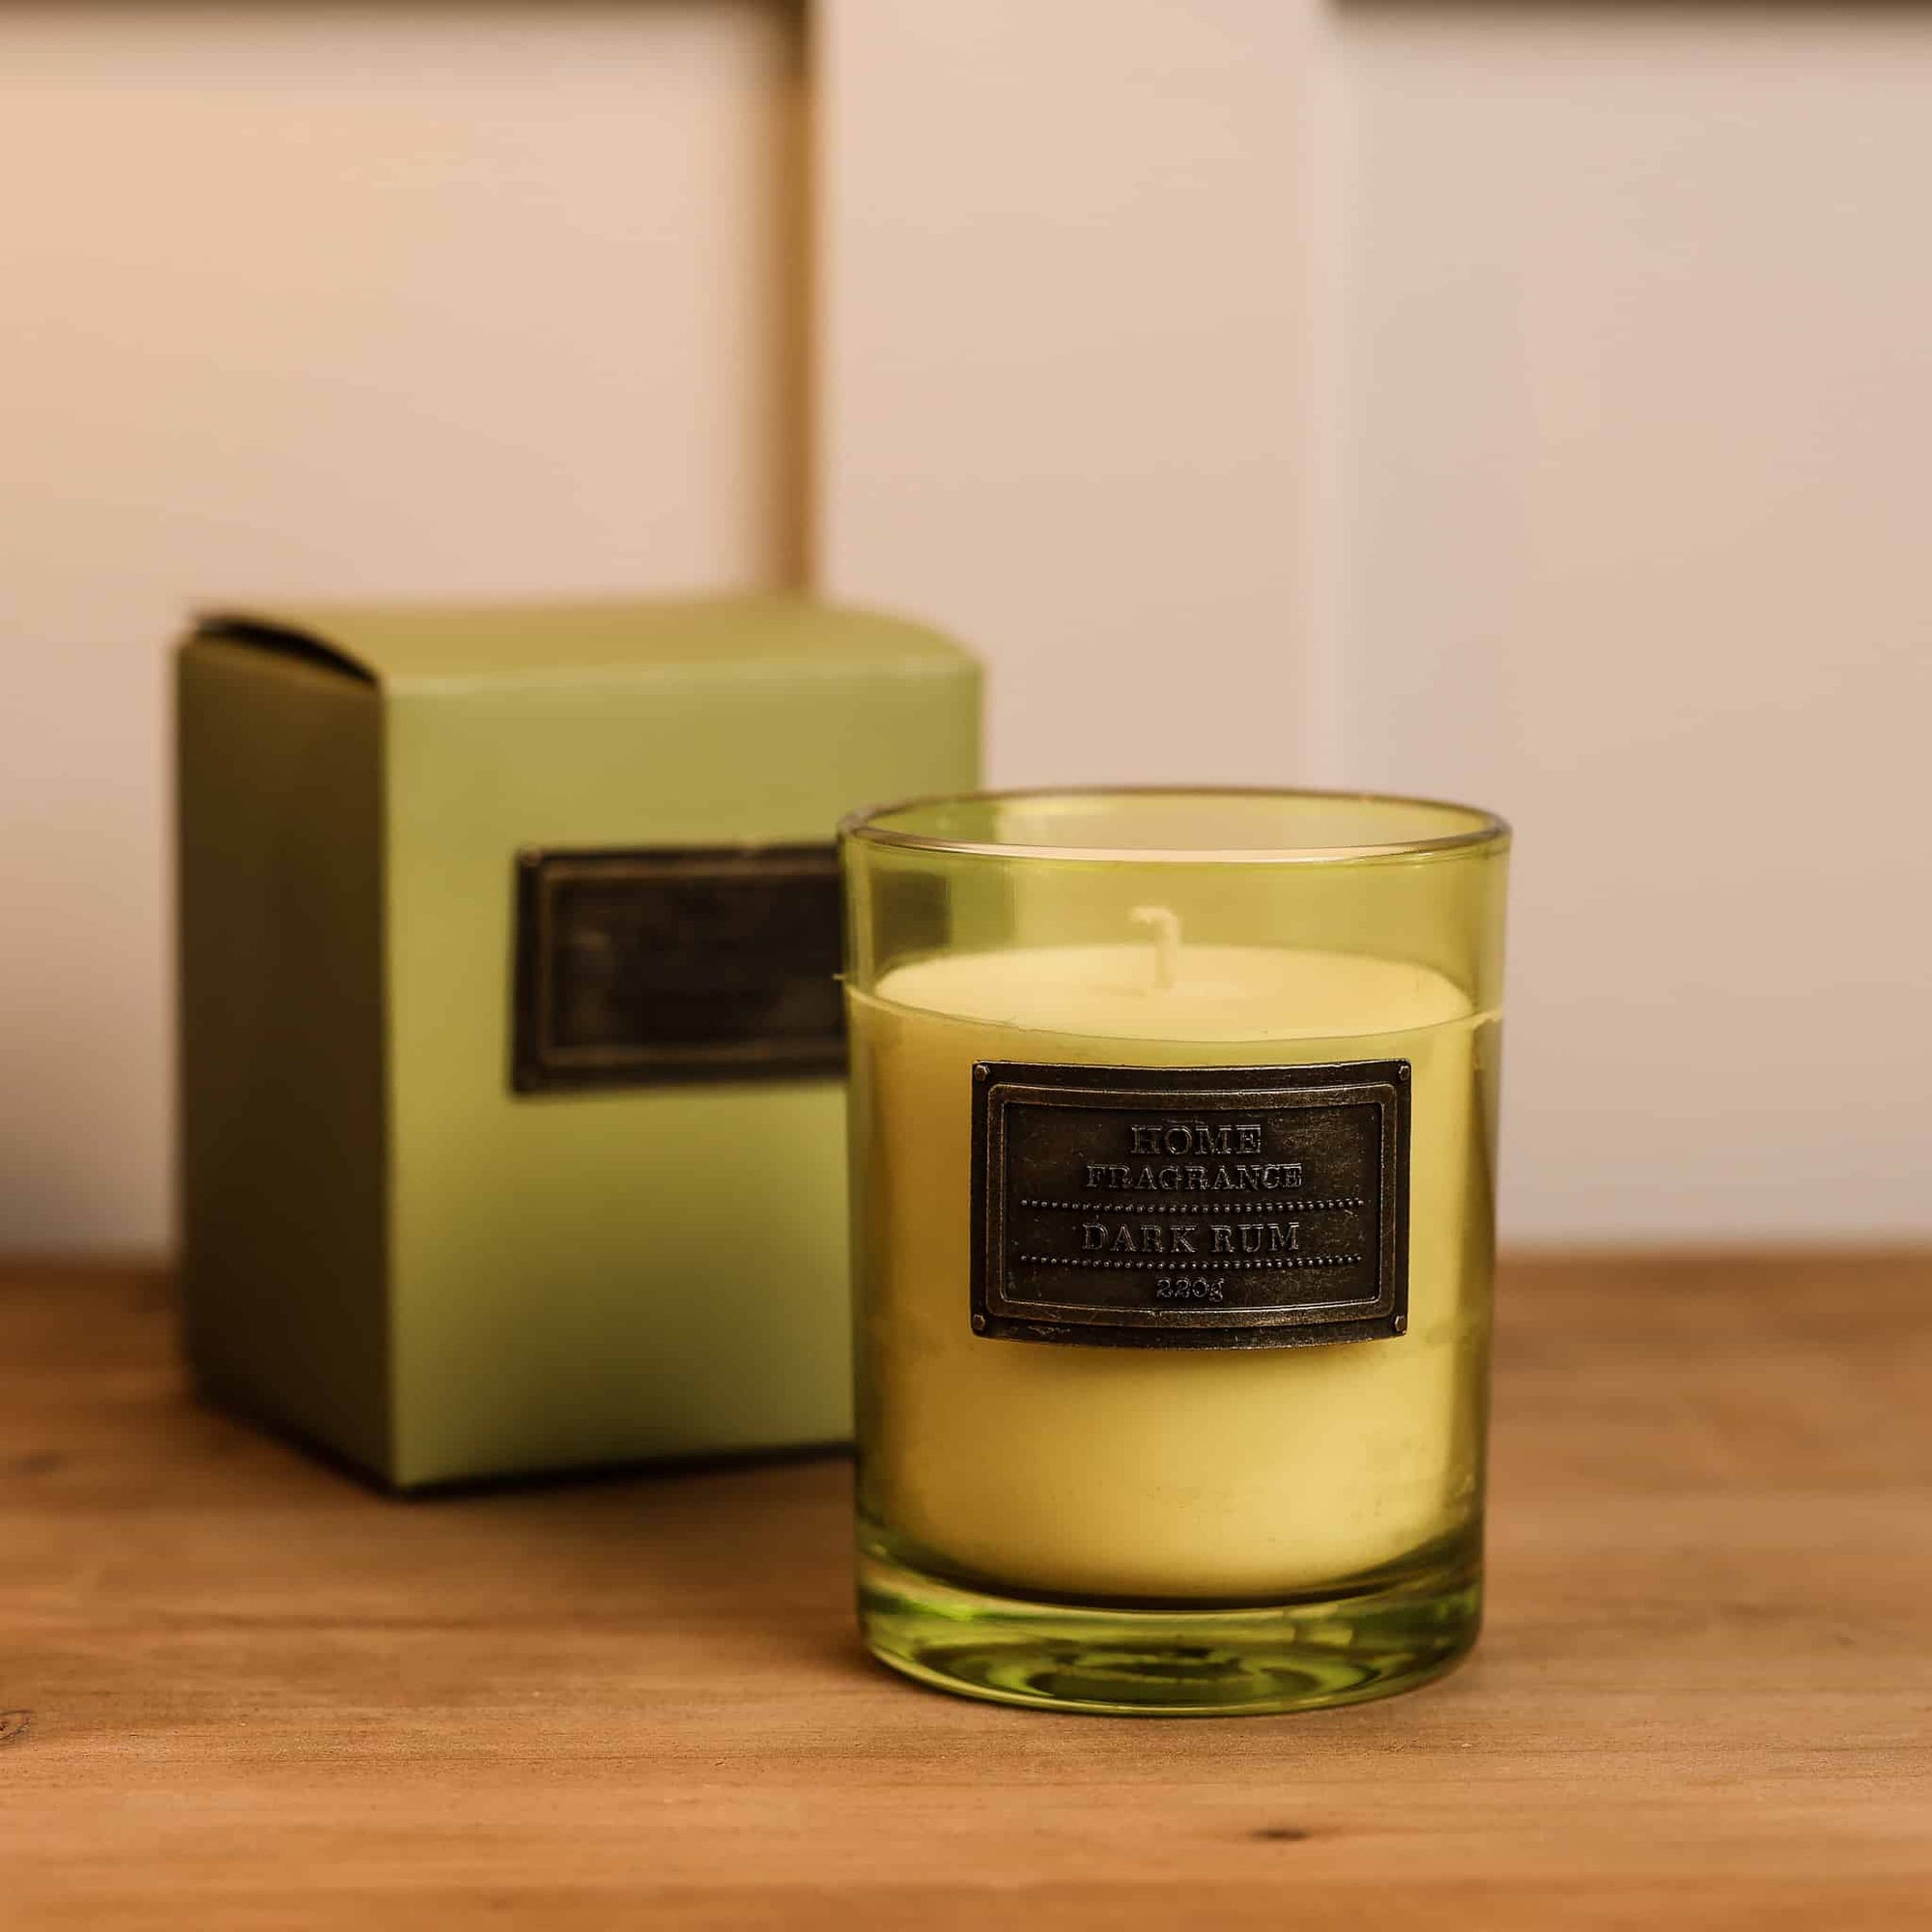 Dark Rum and Lime Candle with presentation box on wooden console. 